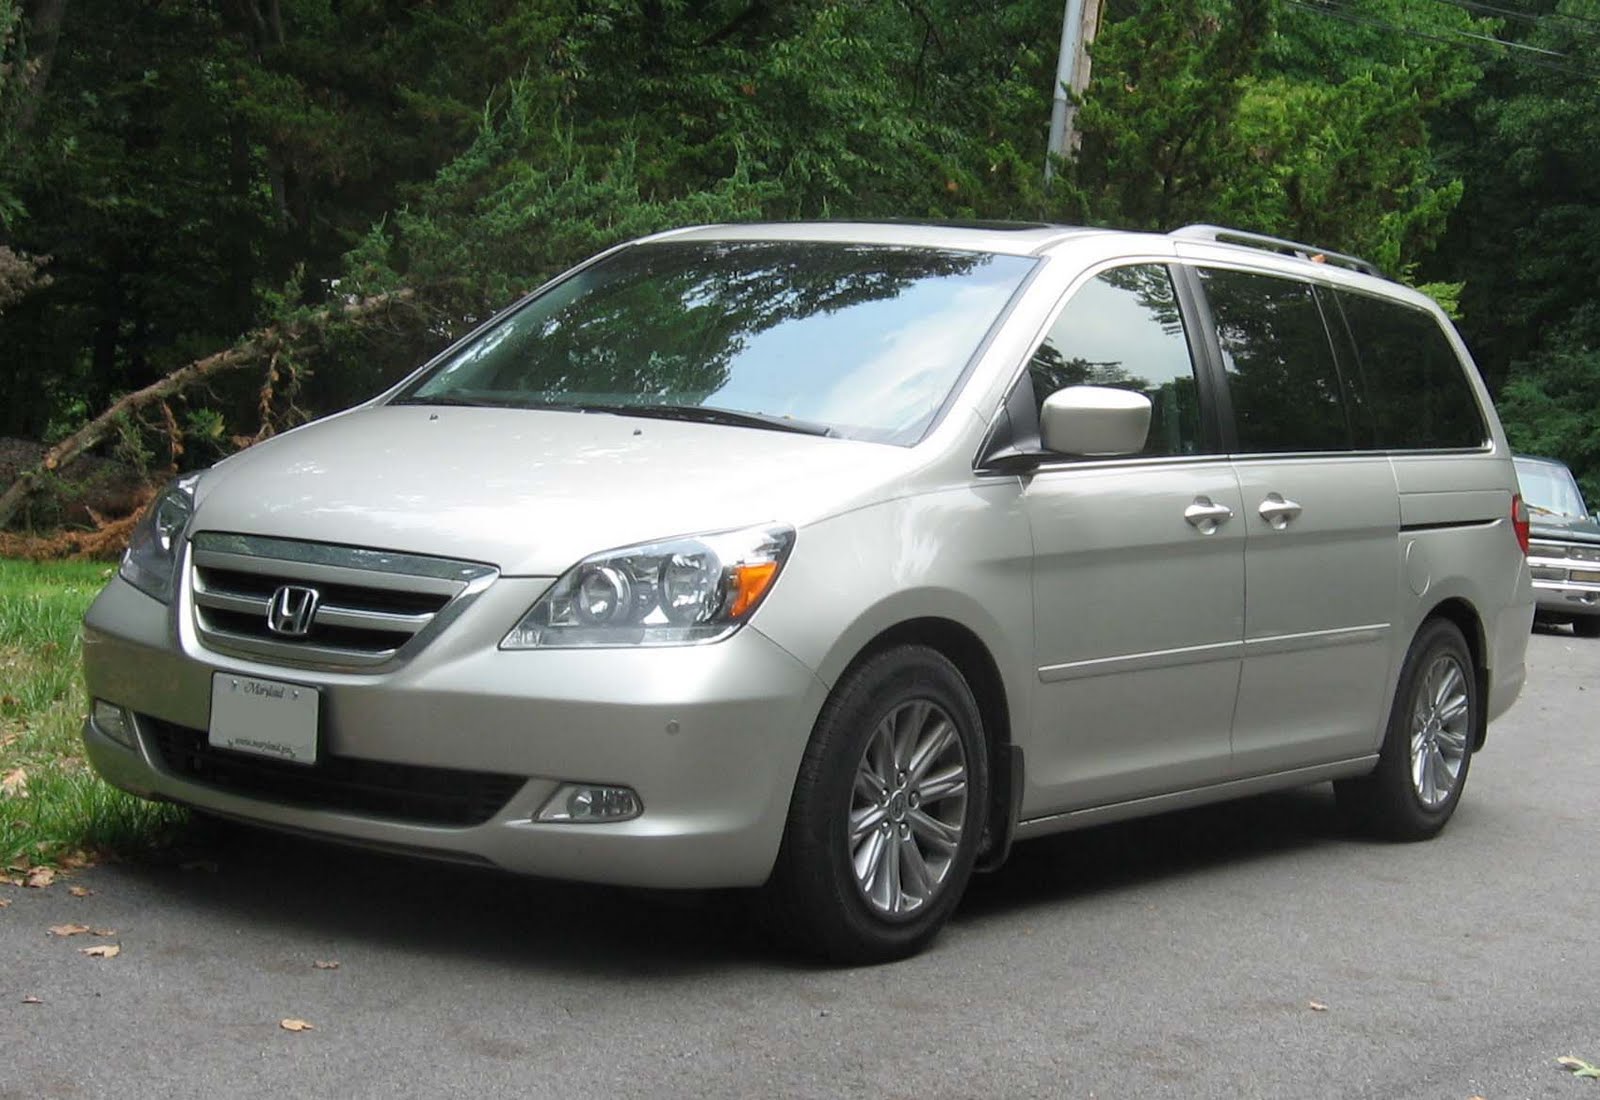 Honda odyssey | Best Cars For You